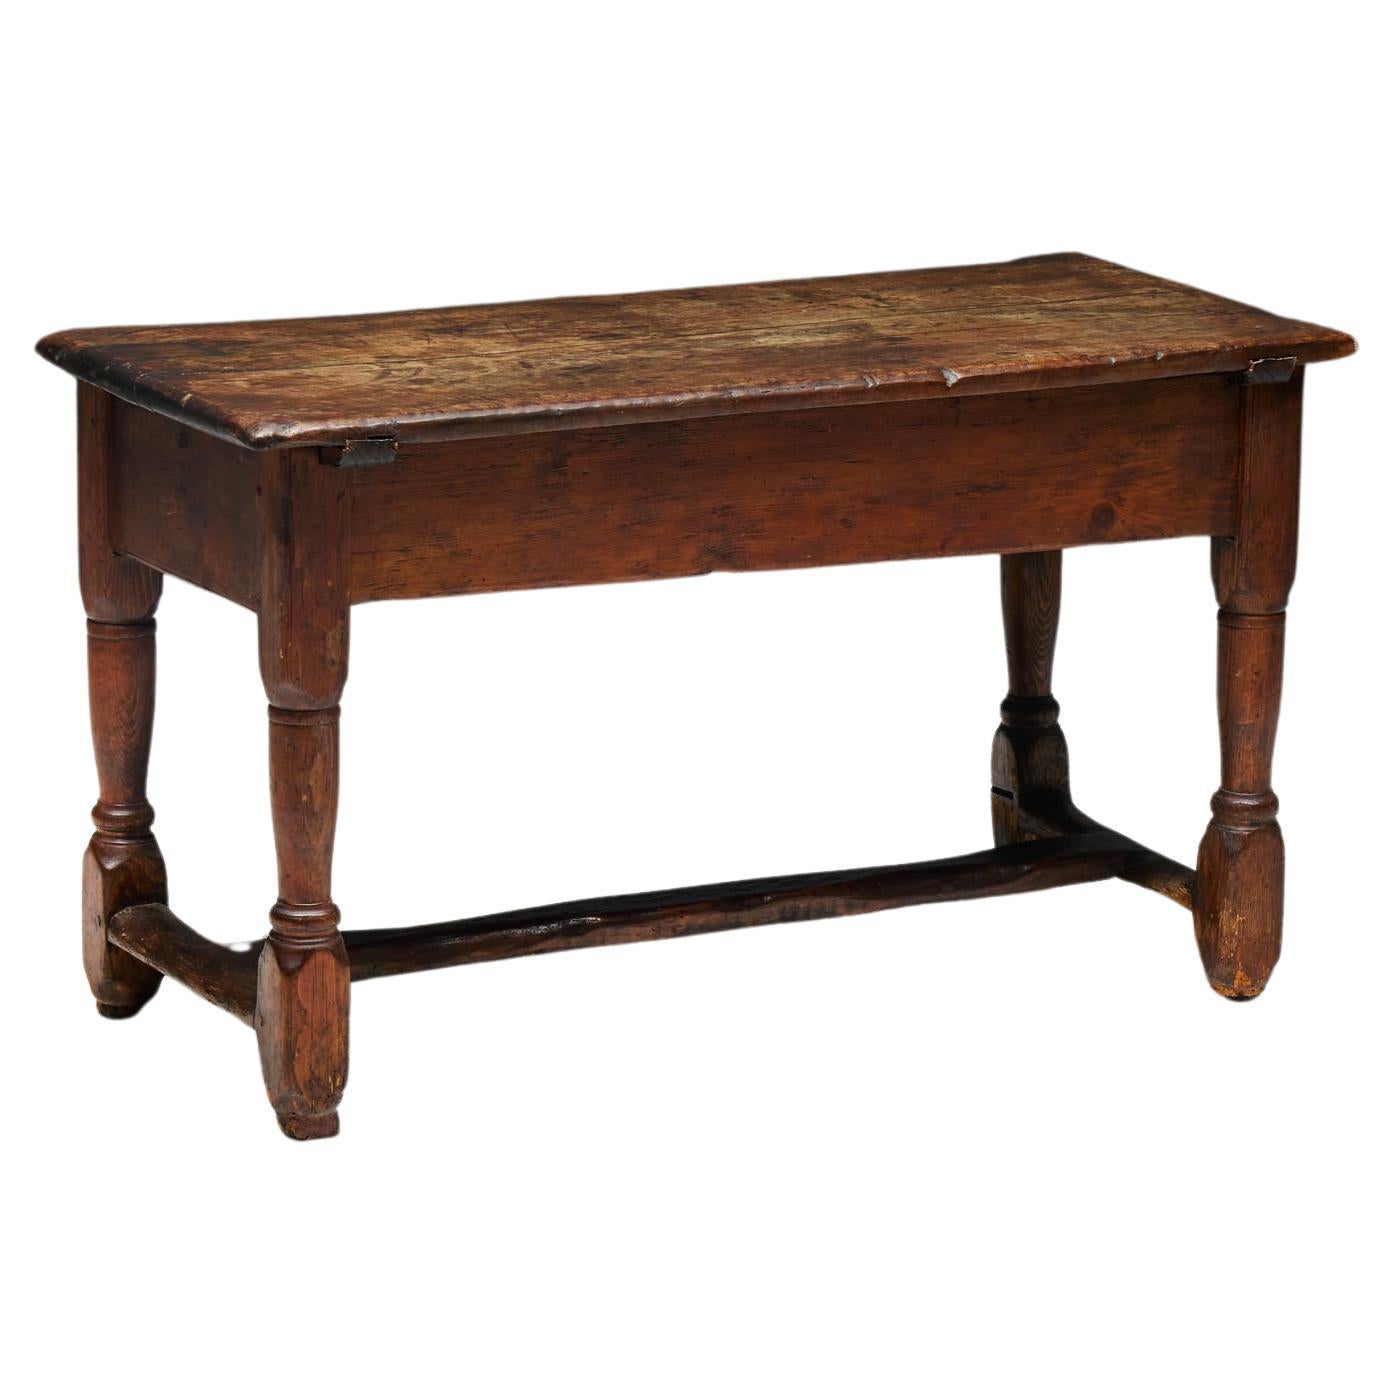 Rustic Art Populaire Writing Table, France, Early 20th Century For Sale